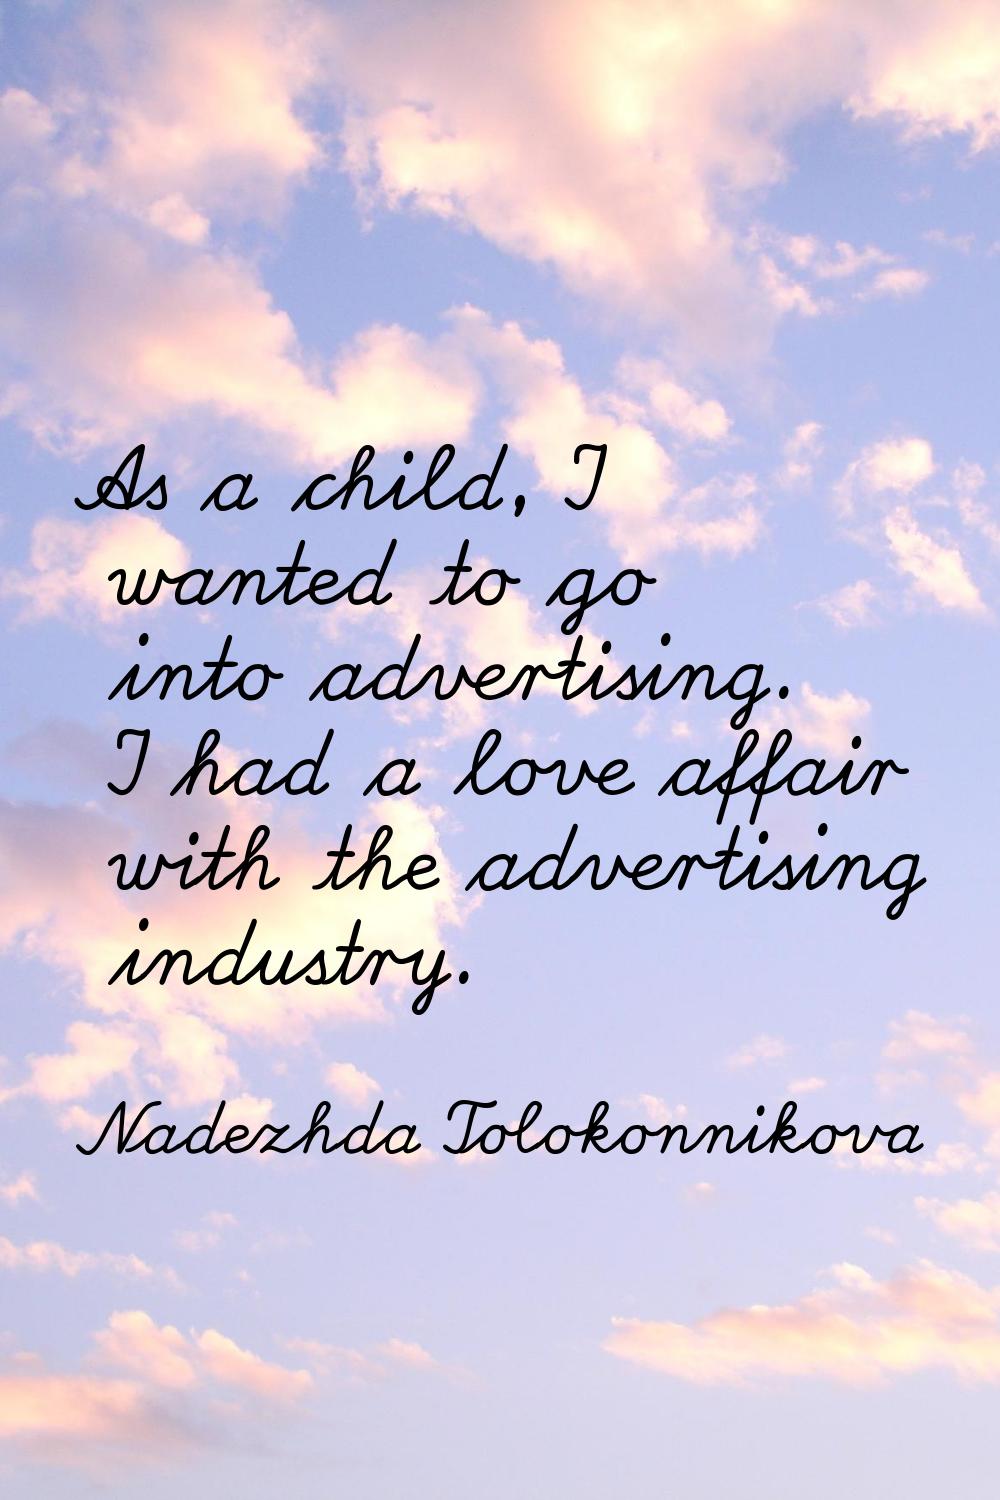 As a child, I wanted to go into advertising. I had a love affair with the advertising industry.